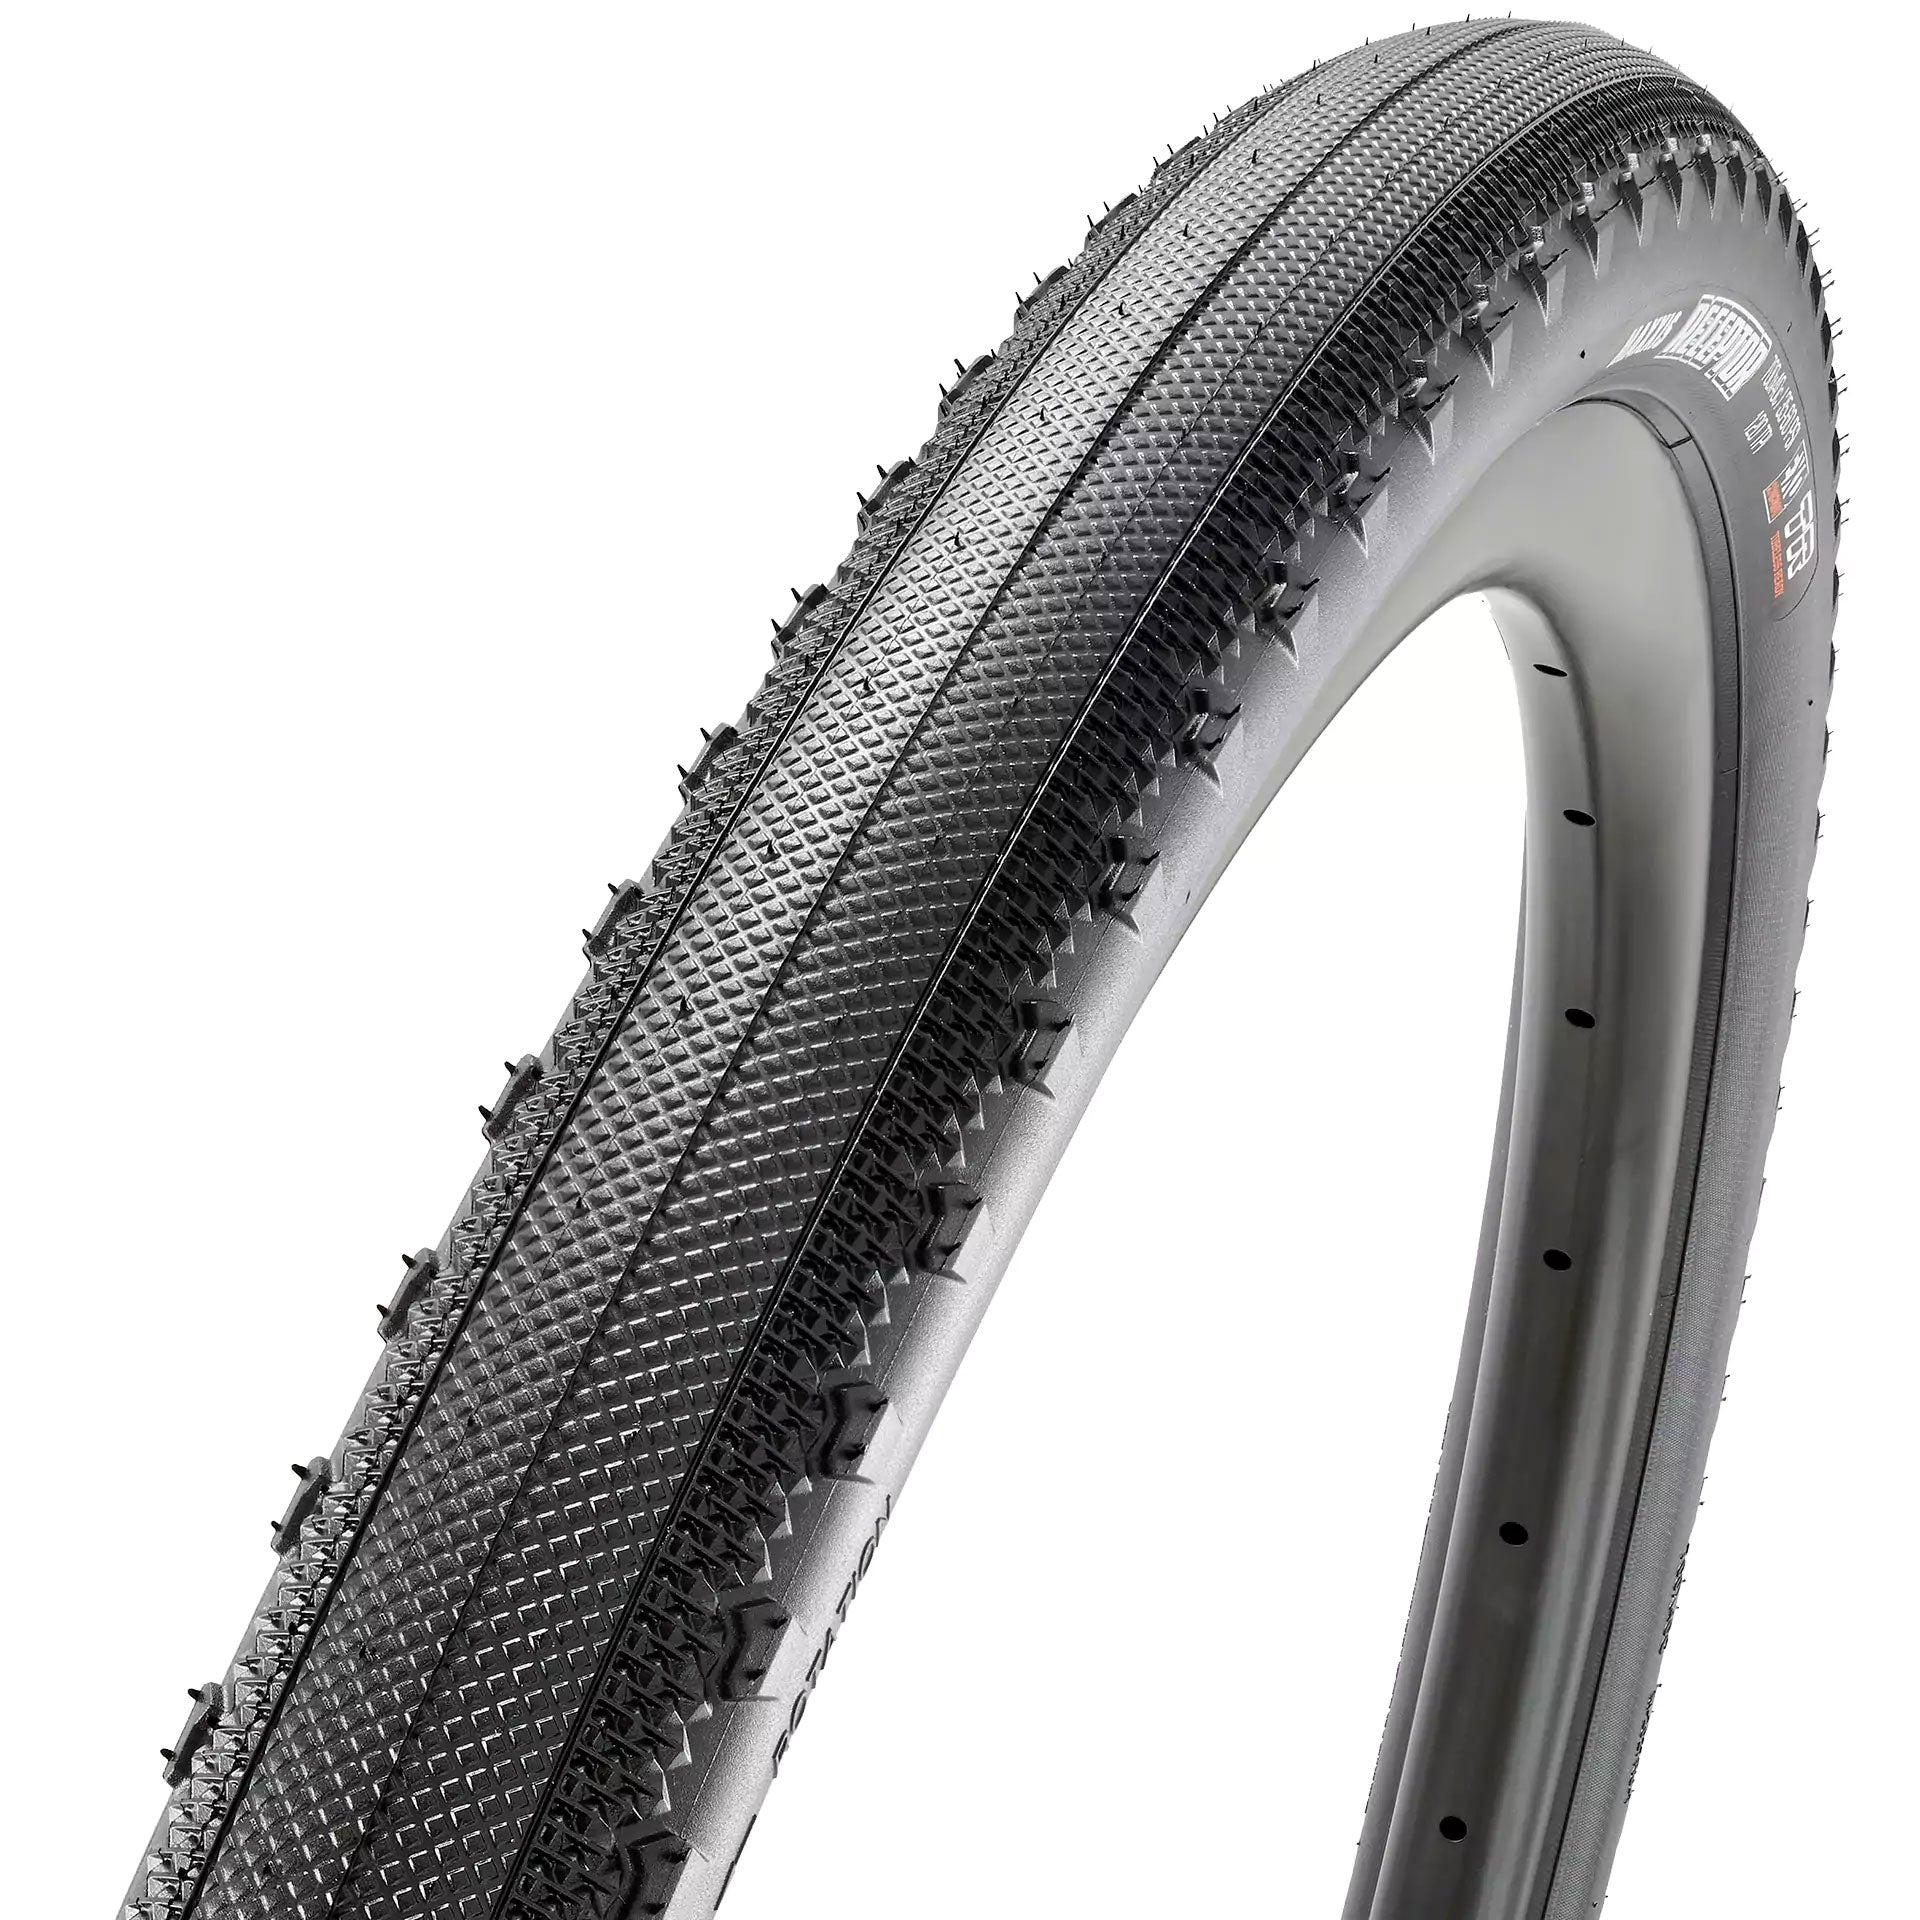 MAXXIS RECEPTOR TLR gravel tire